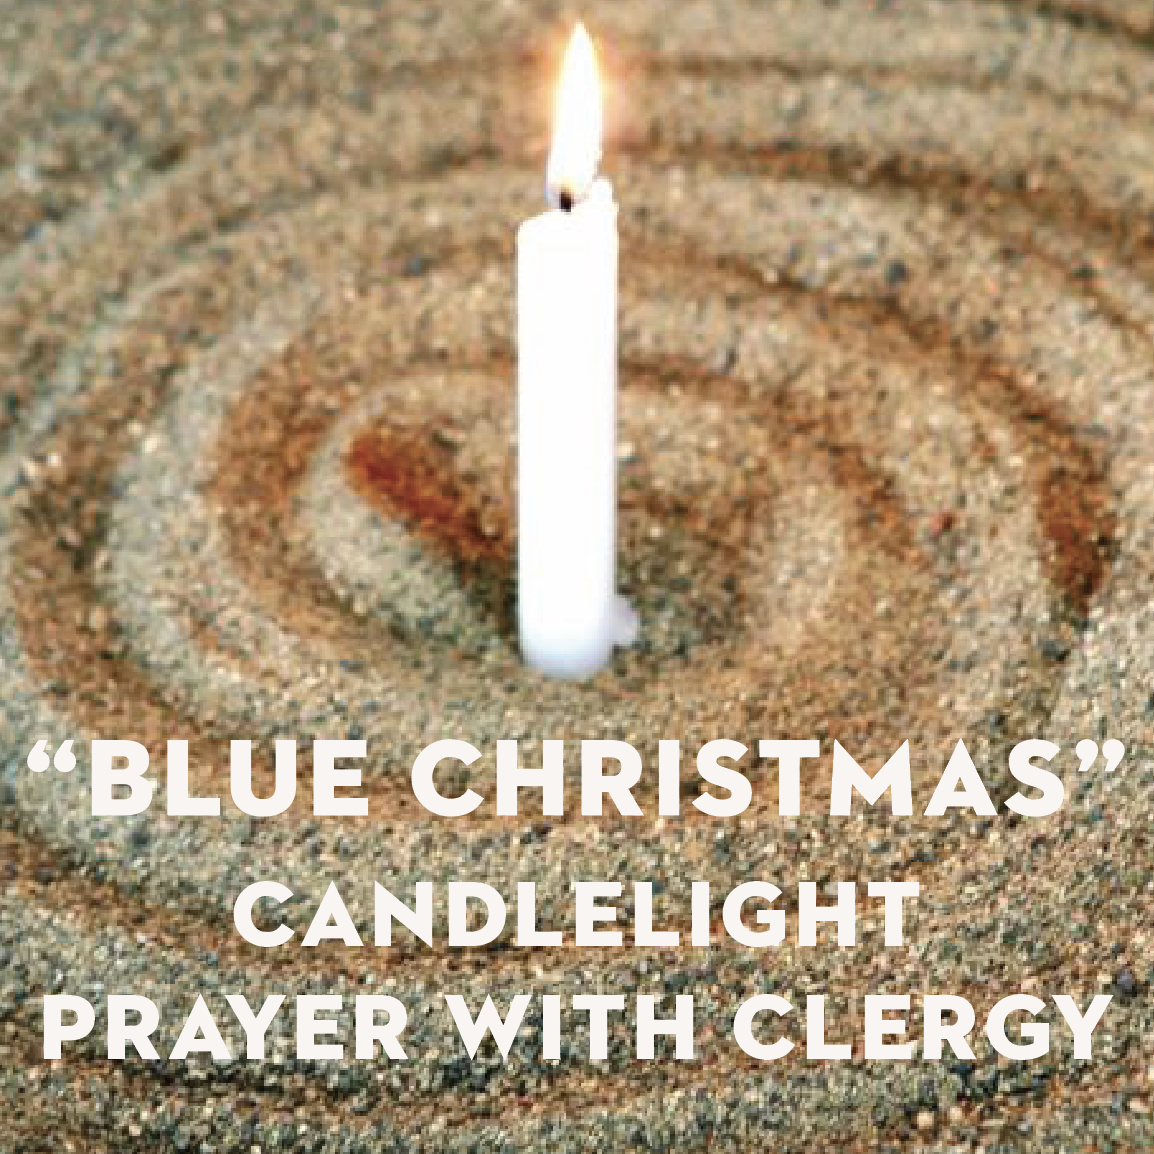 “Blue Christmas” Candlelight Prayer with Clergy